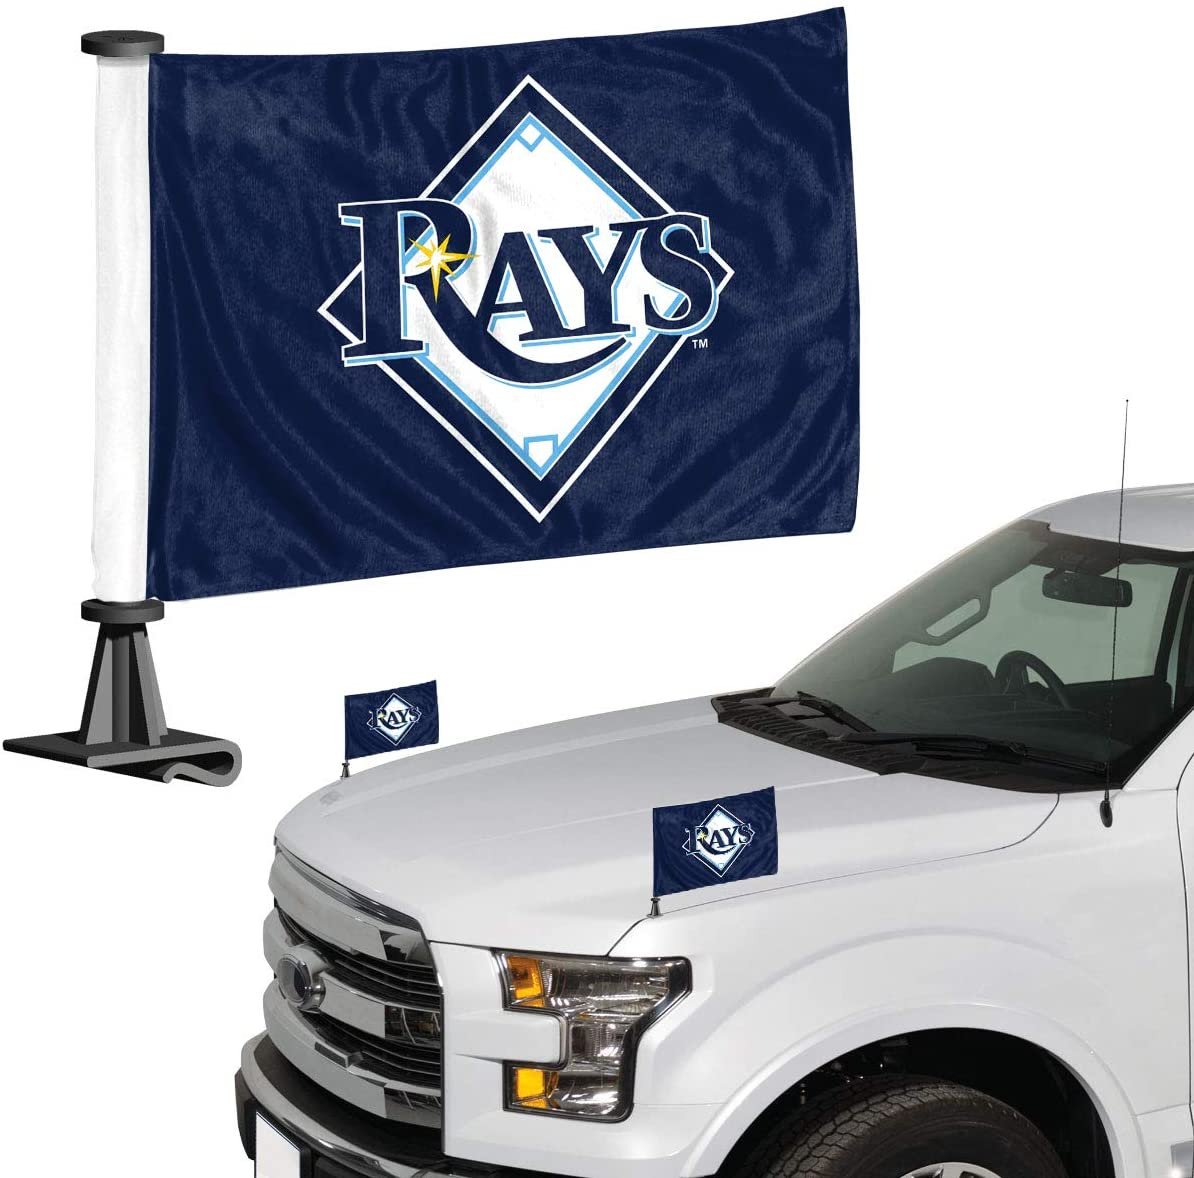 Promark MLB Tampa Bay Rays Flag Set 2Piece Ambassador Styletampa Bay Rays Flag Set 2Piece Ambassador Style, Team Color, One Size